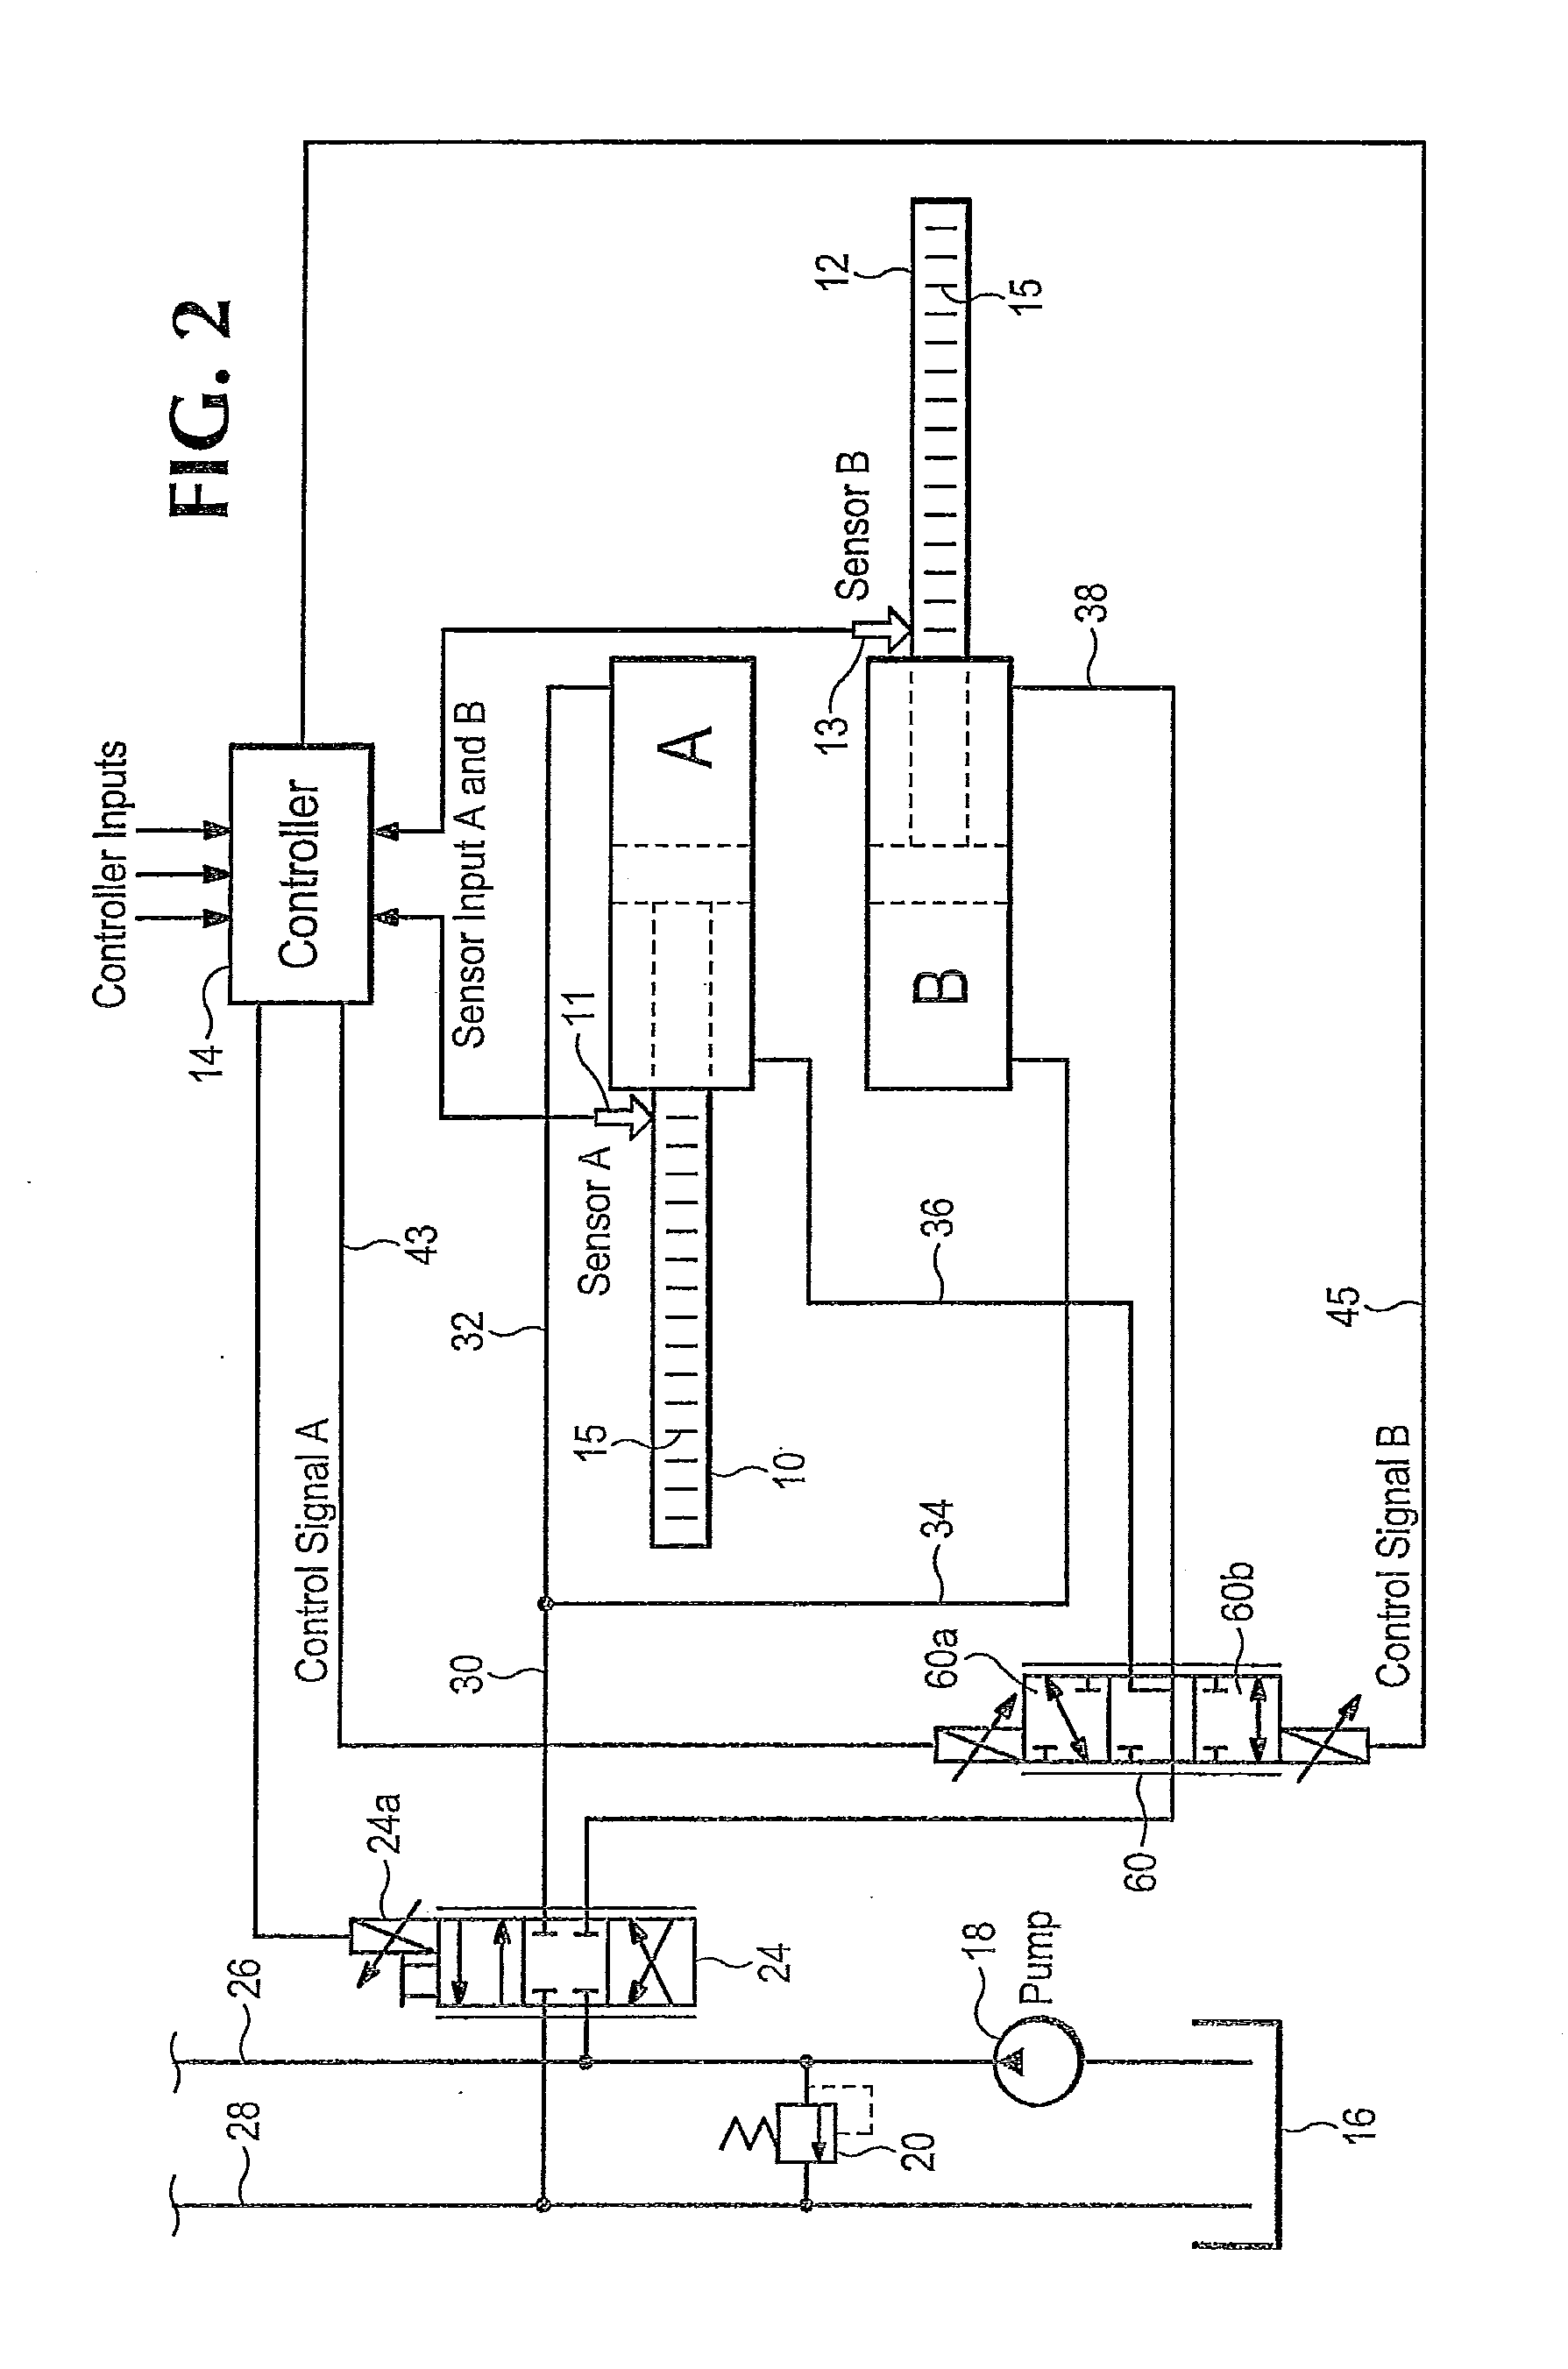 Fluid power control system for mobile load handling equipment